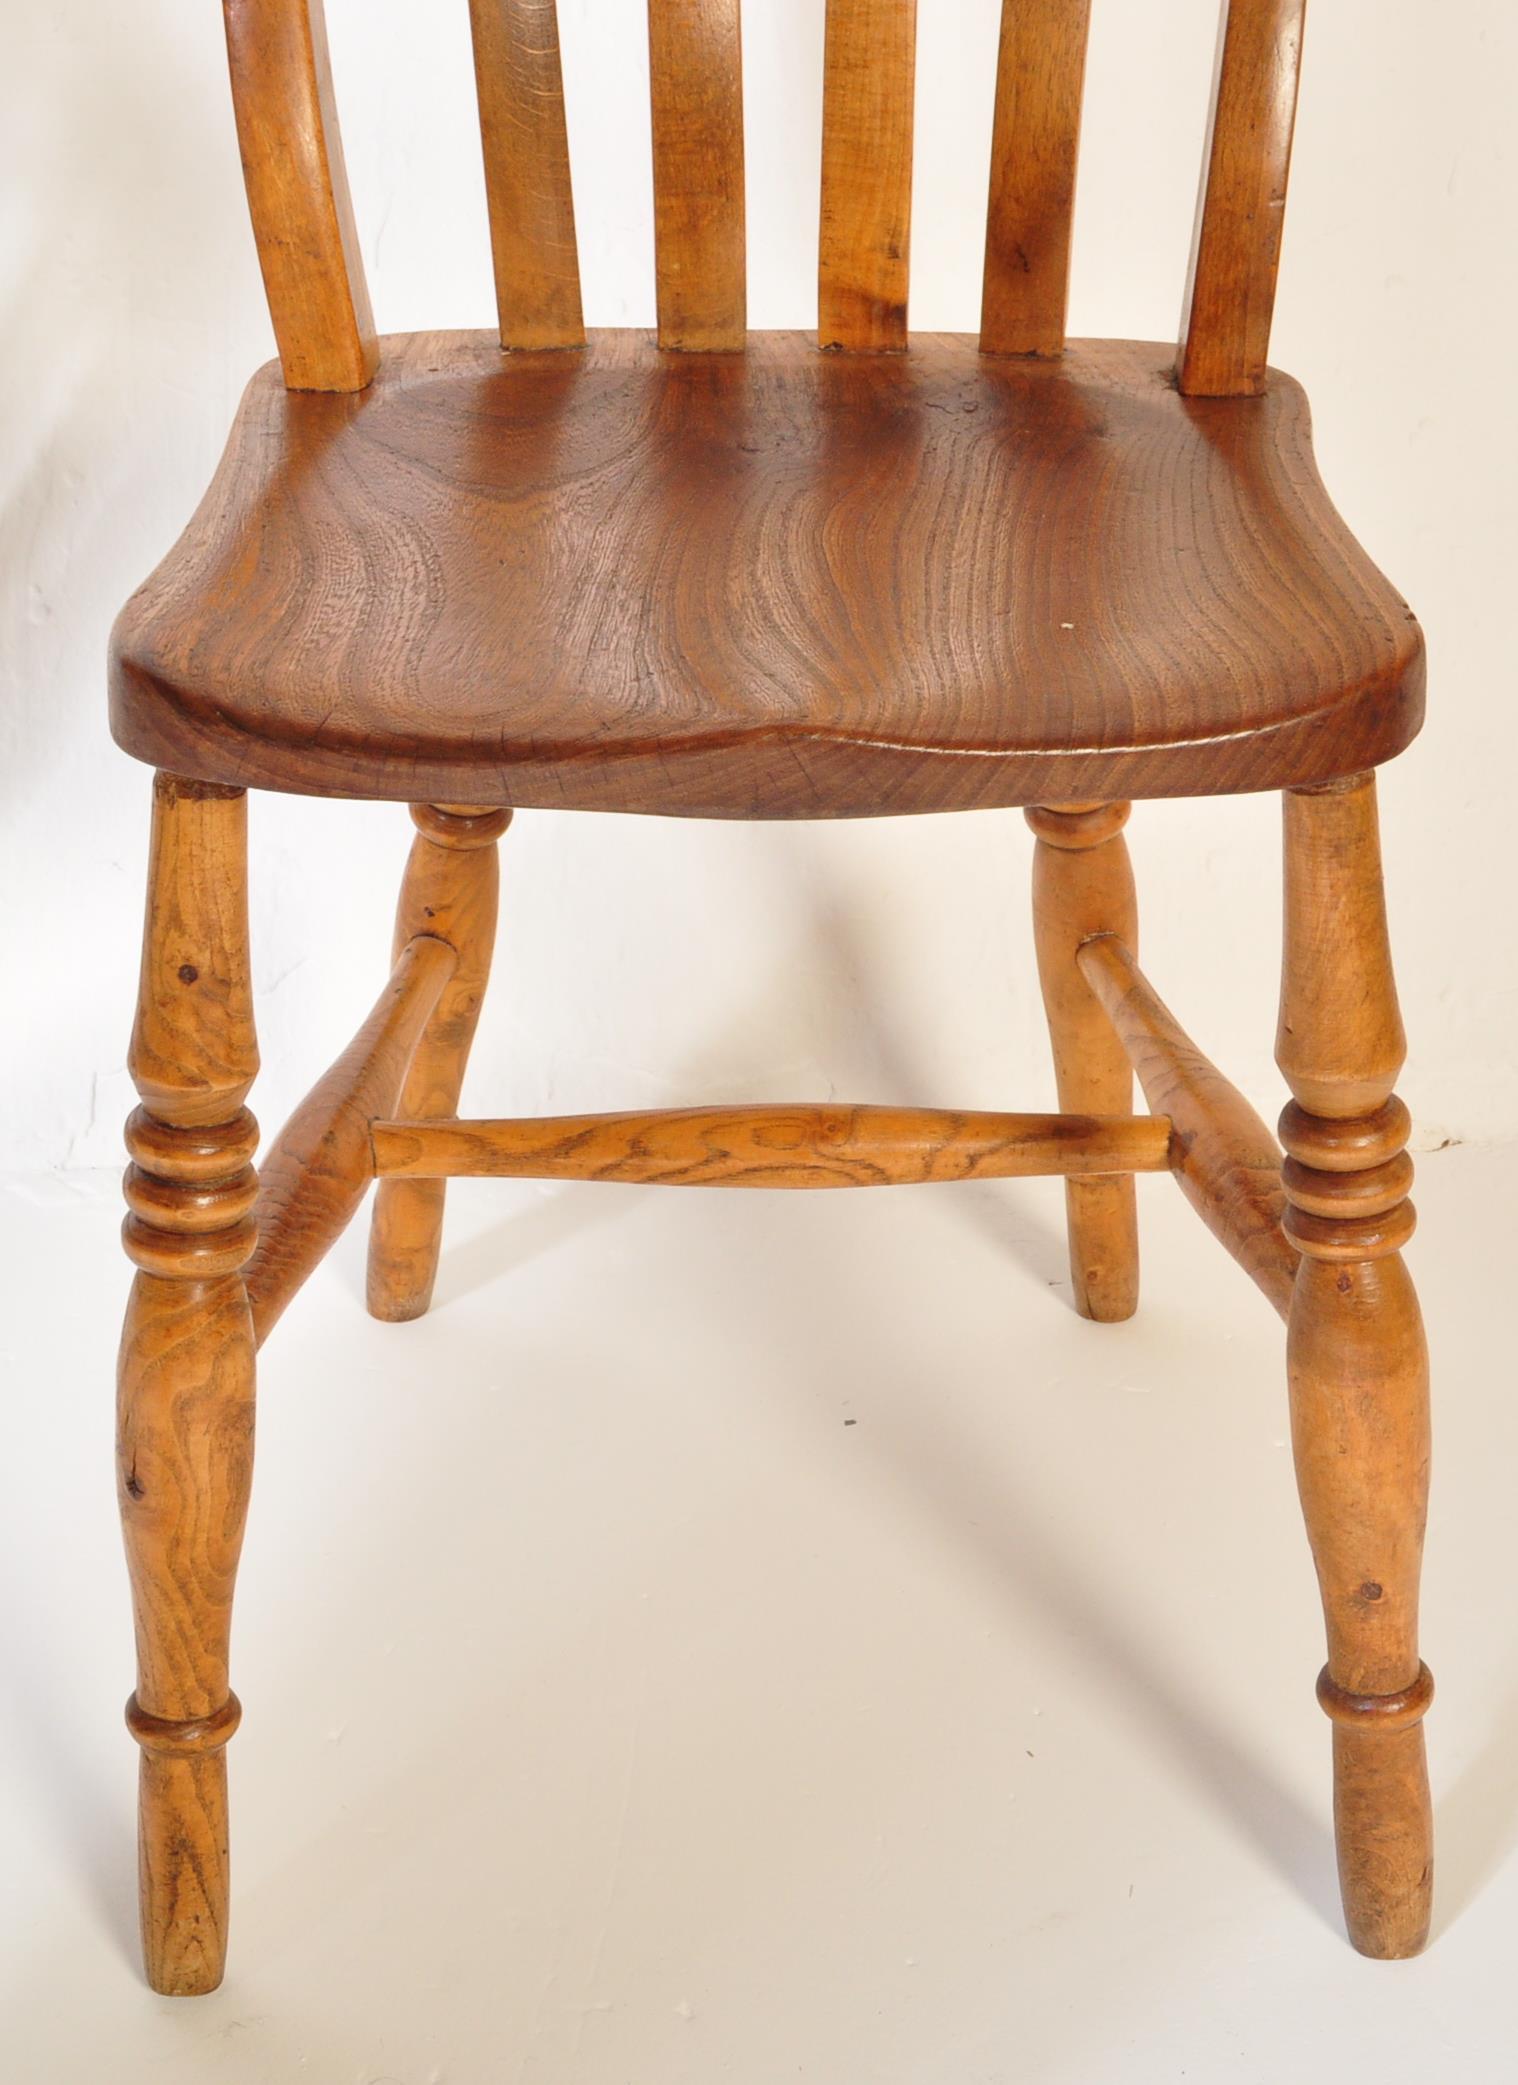 PAIR OF VICTORIAN BEECH & ELM FARMHOUSE WINDSOR CHAIRS - Image 5 of 5